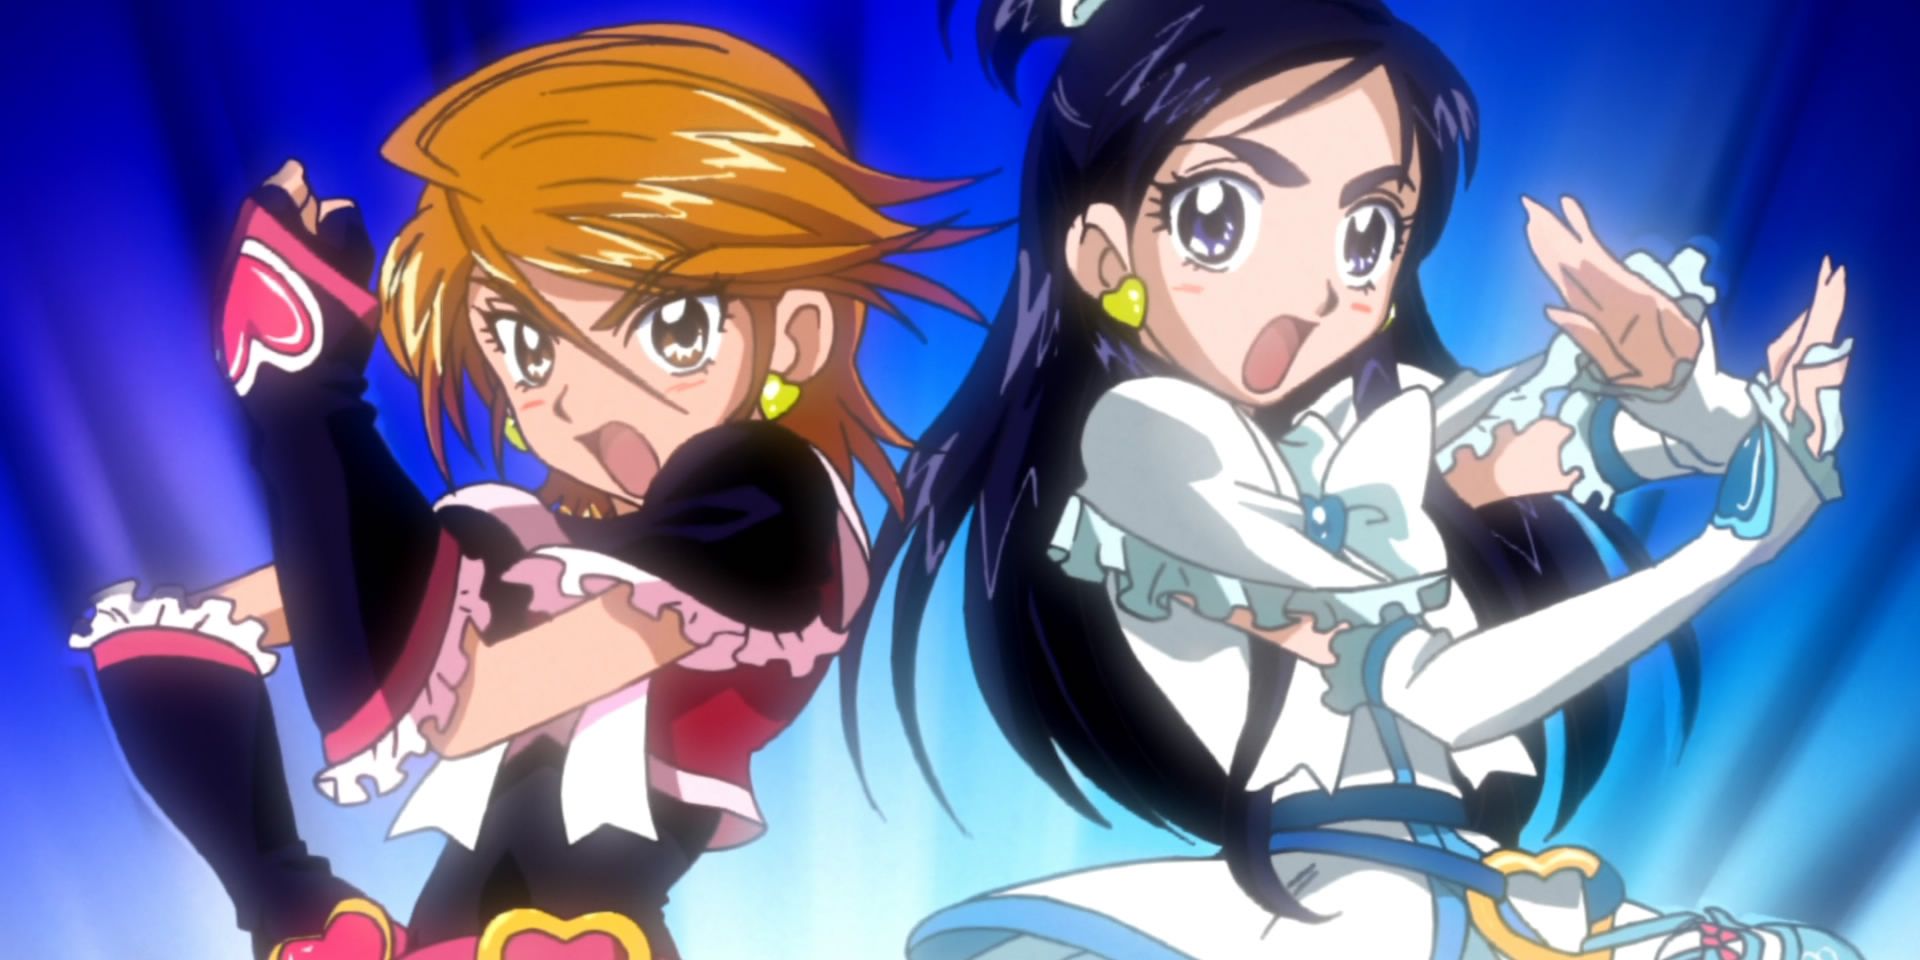 Cure Black and Cure White about to fight in Pretty Cure.